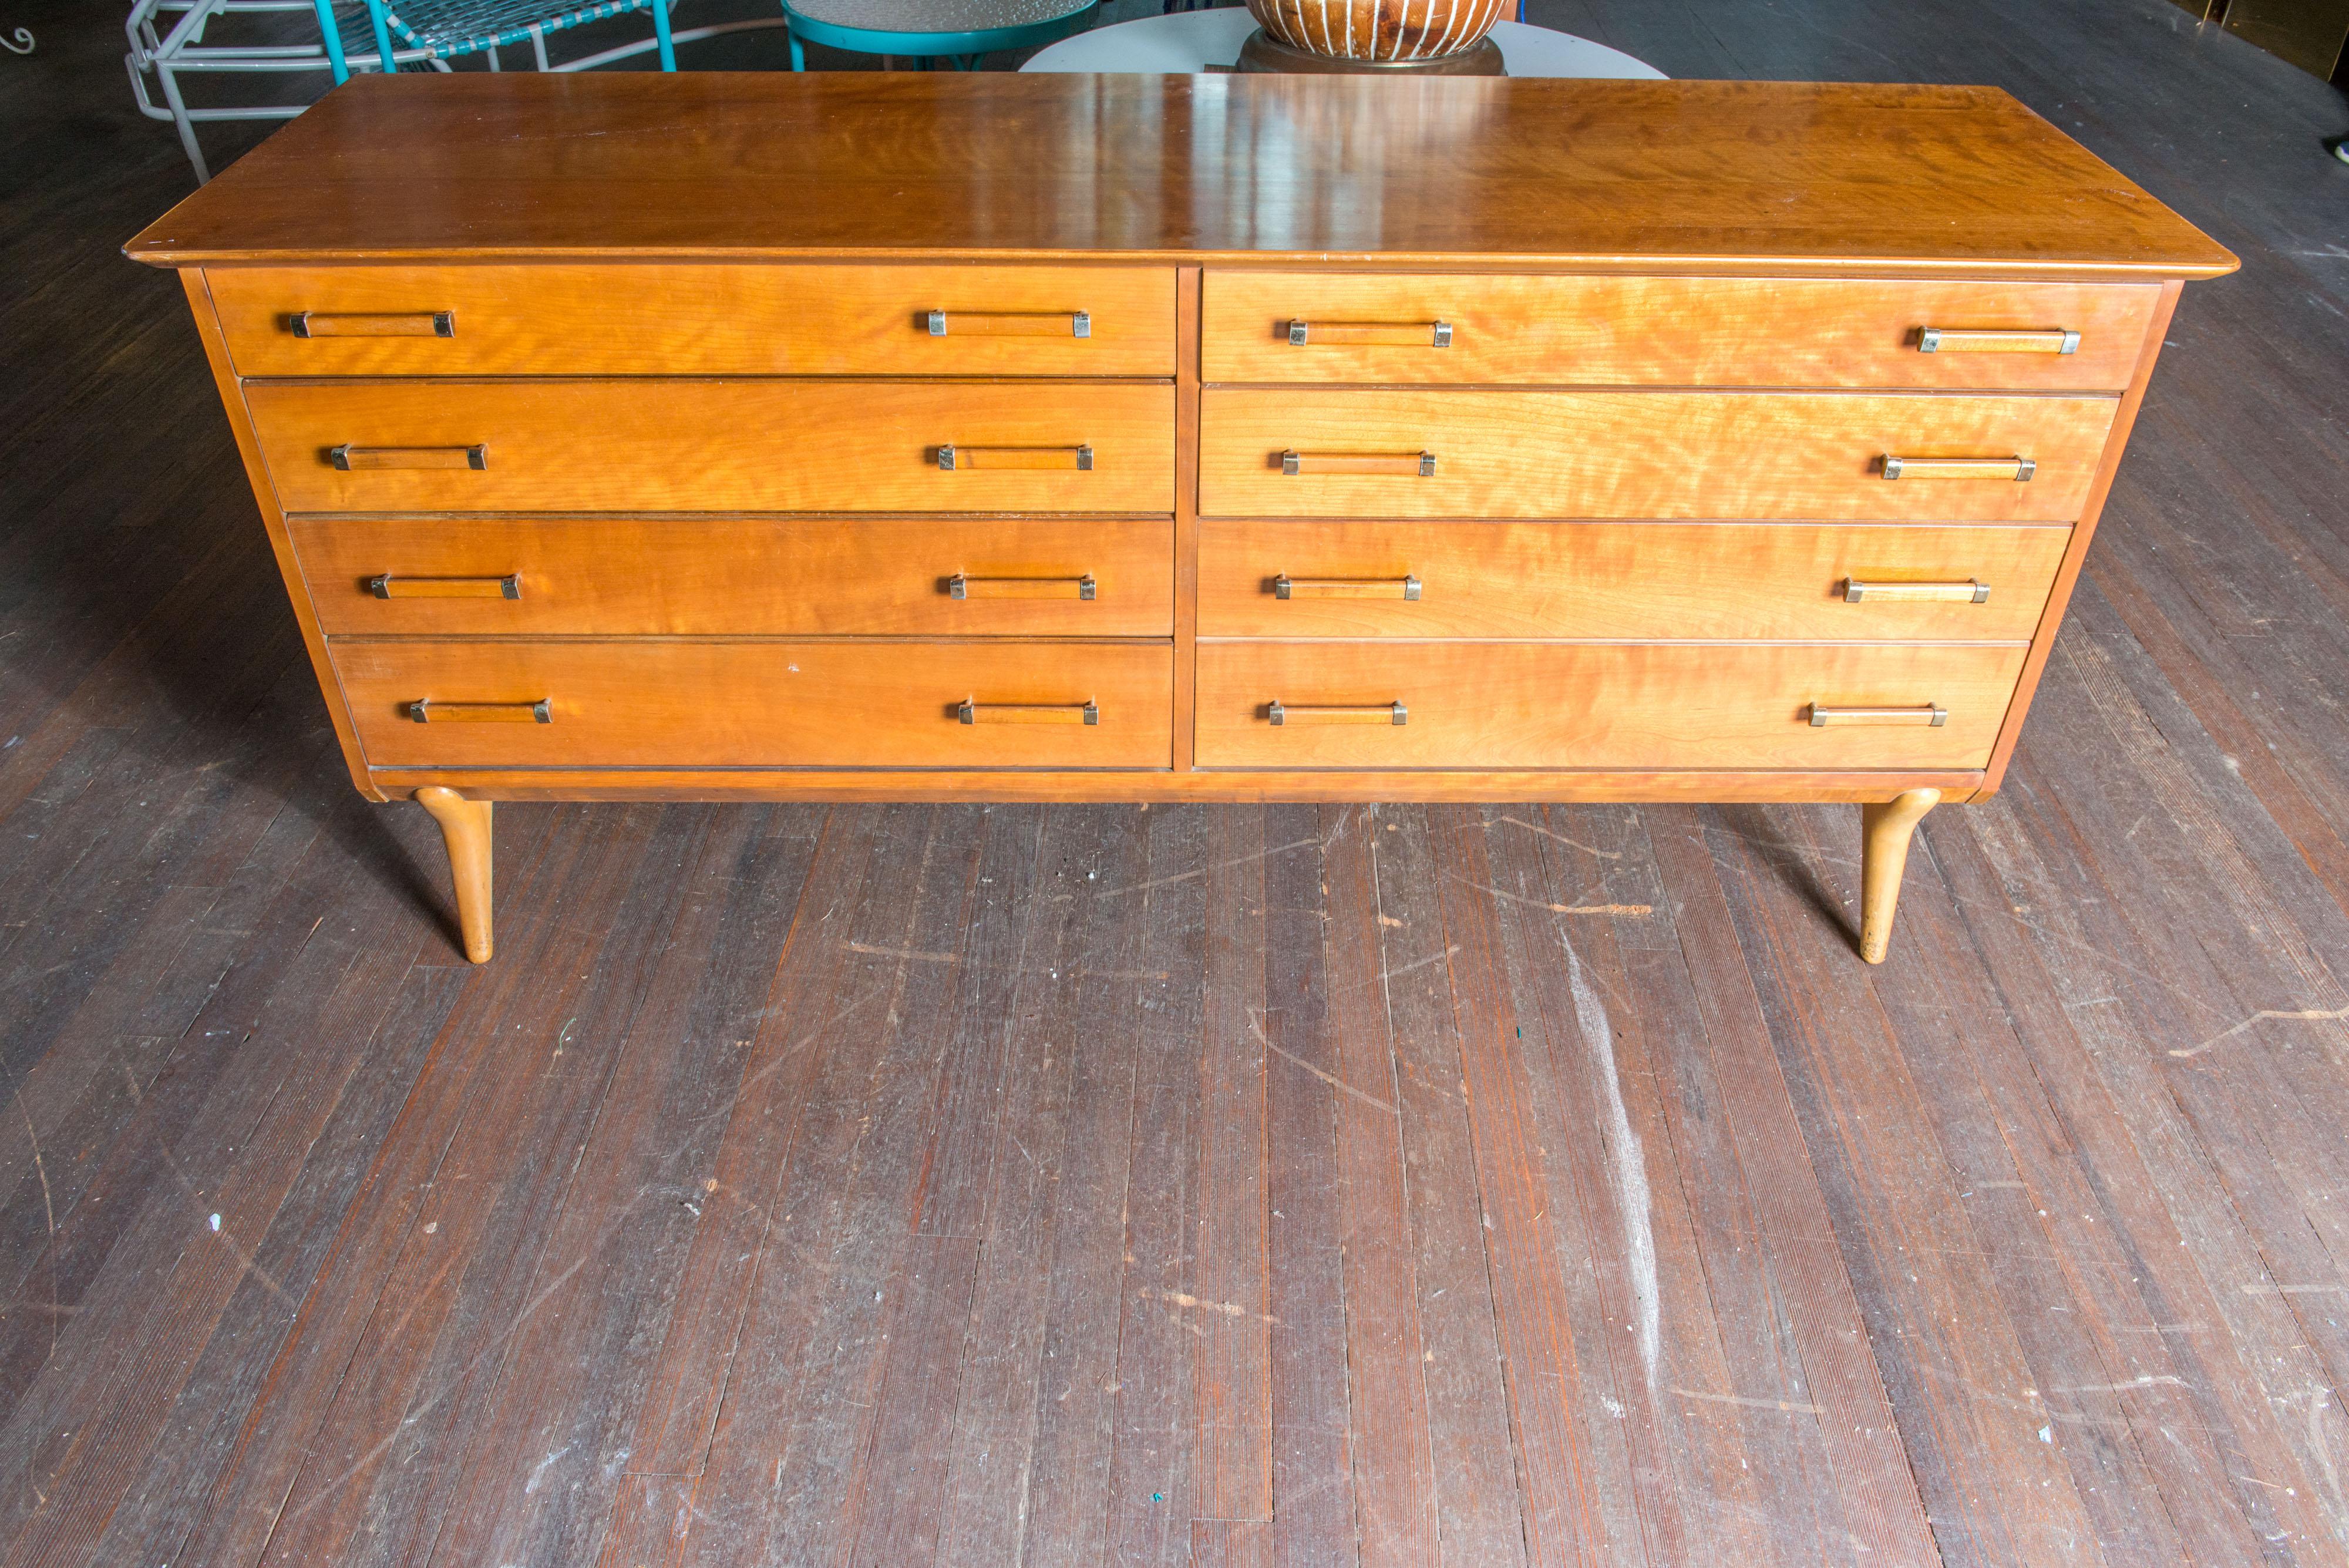 Mid-Century Modern credenza or chest of drawers by Renzo Rutili for Johnson Furniture Company. Solid wood, eight dovetailed drawers with brass trimmed wood pulls. Exceptionally good original condition. Timeless style.